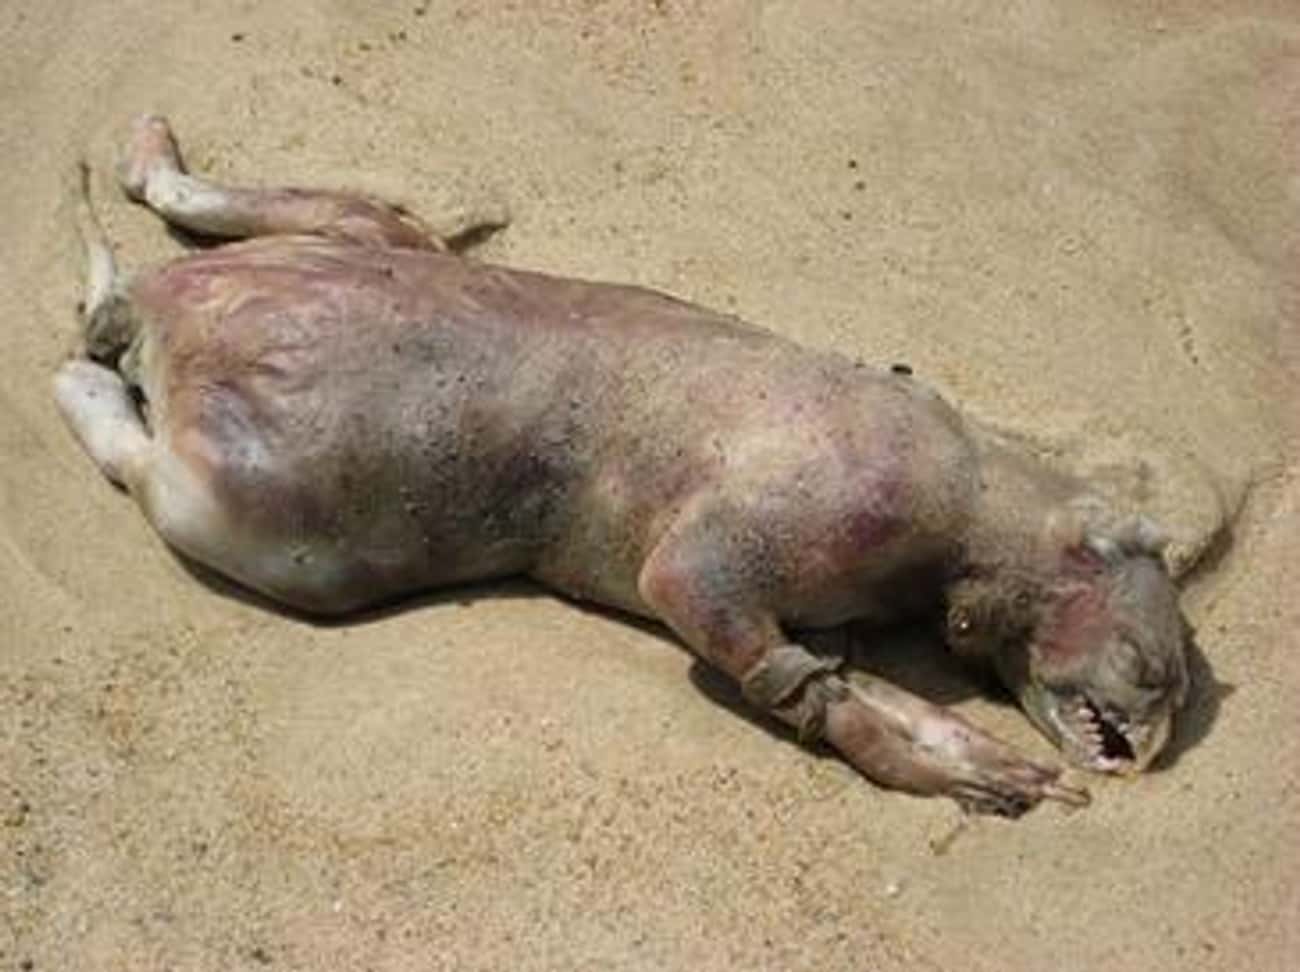 Montauk Monster Washes Up On A New York Beach